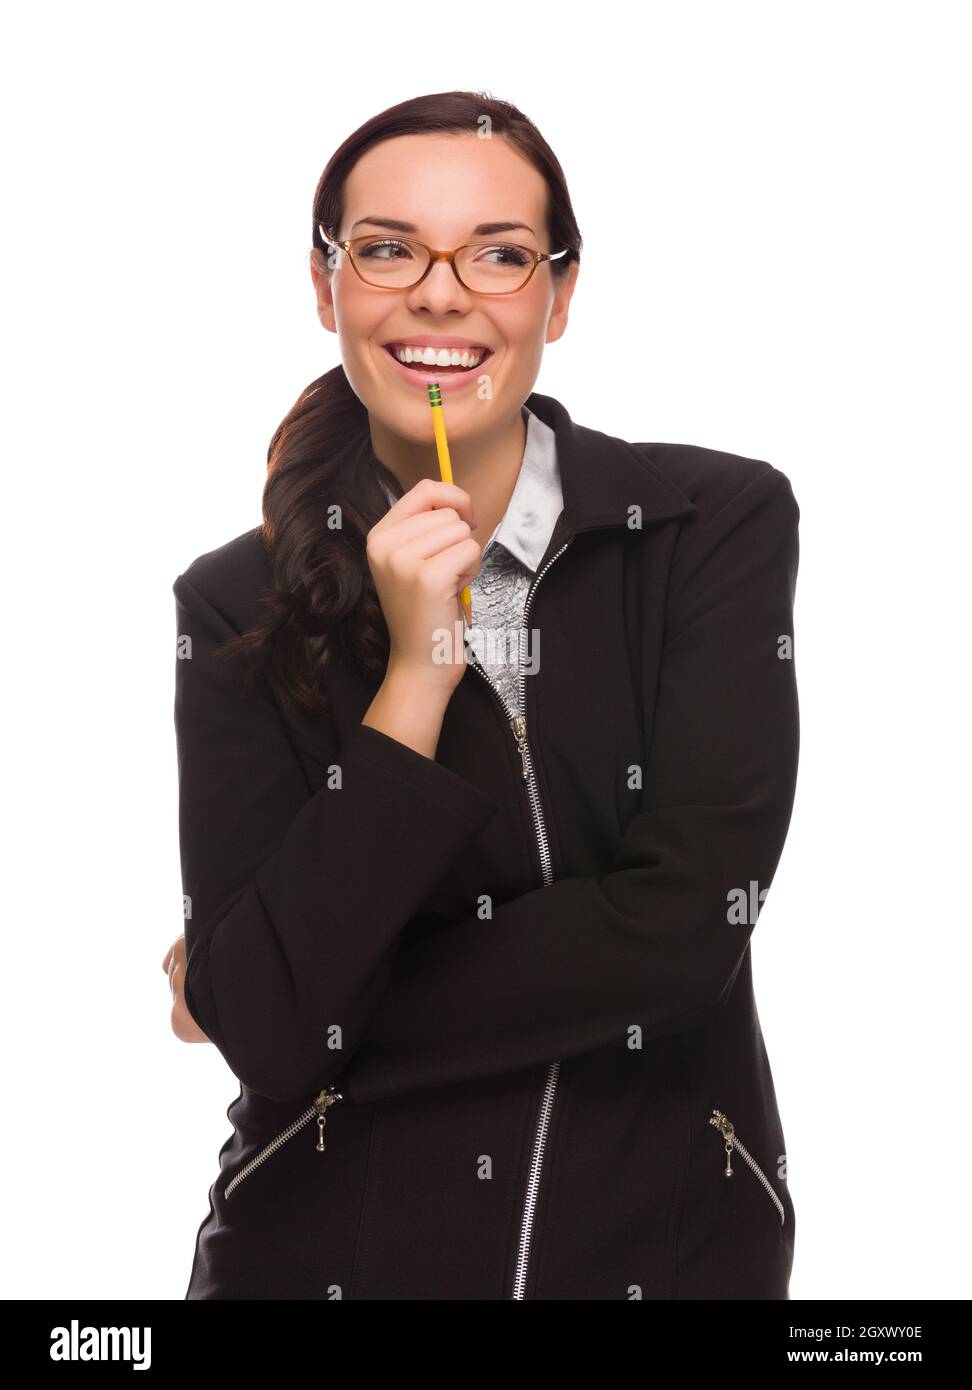 Mixed Race Businesswoman Holding Pencil Looking To The Side Isolated on a White Background. Stock Photo